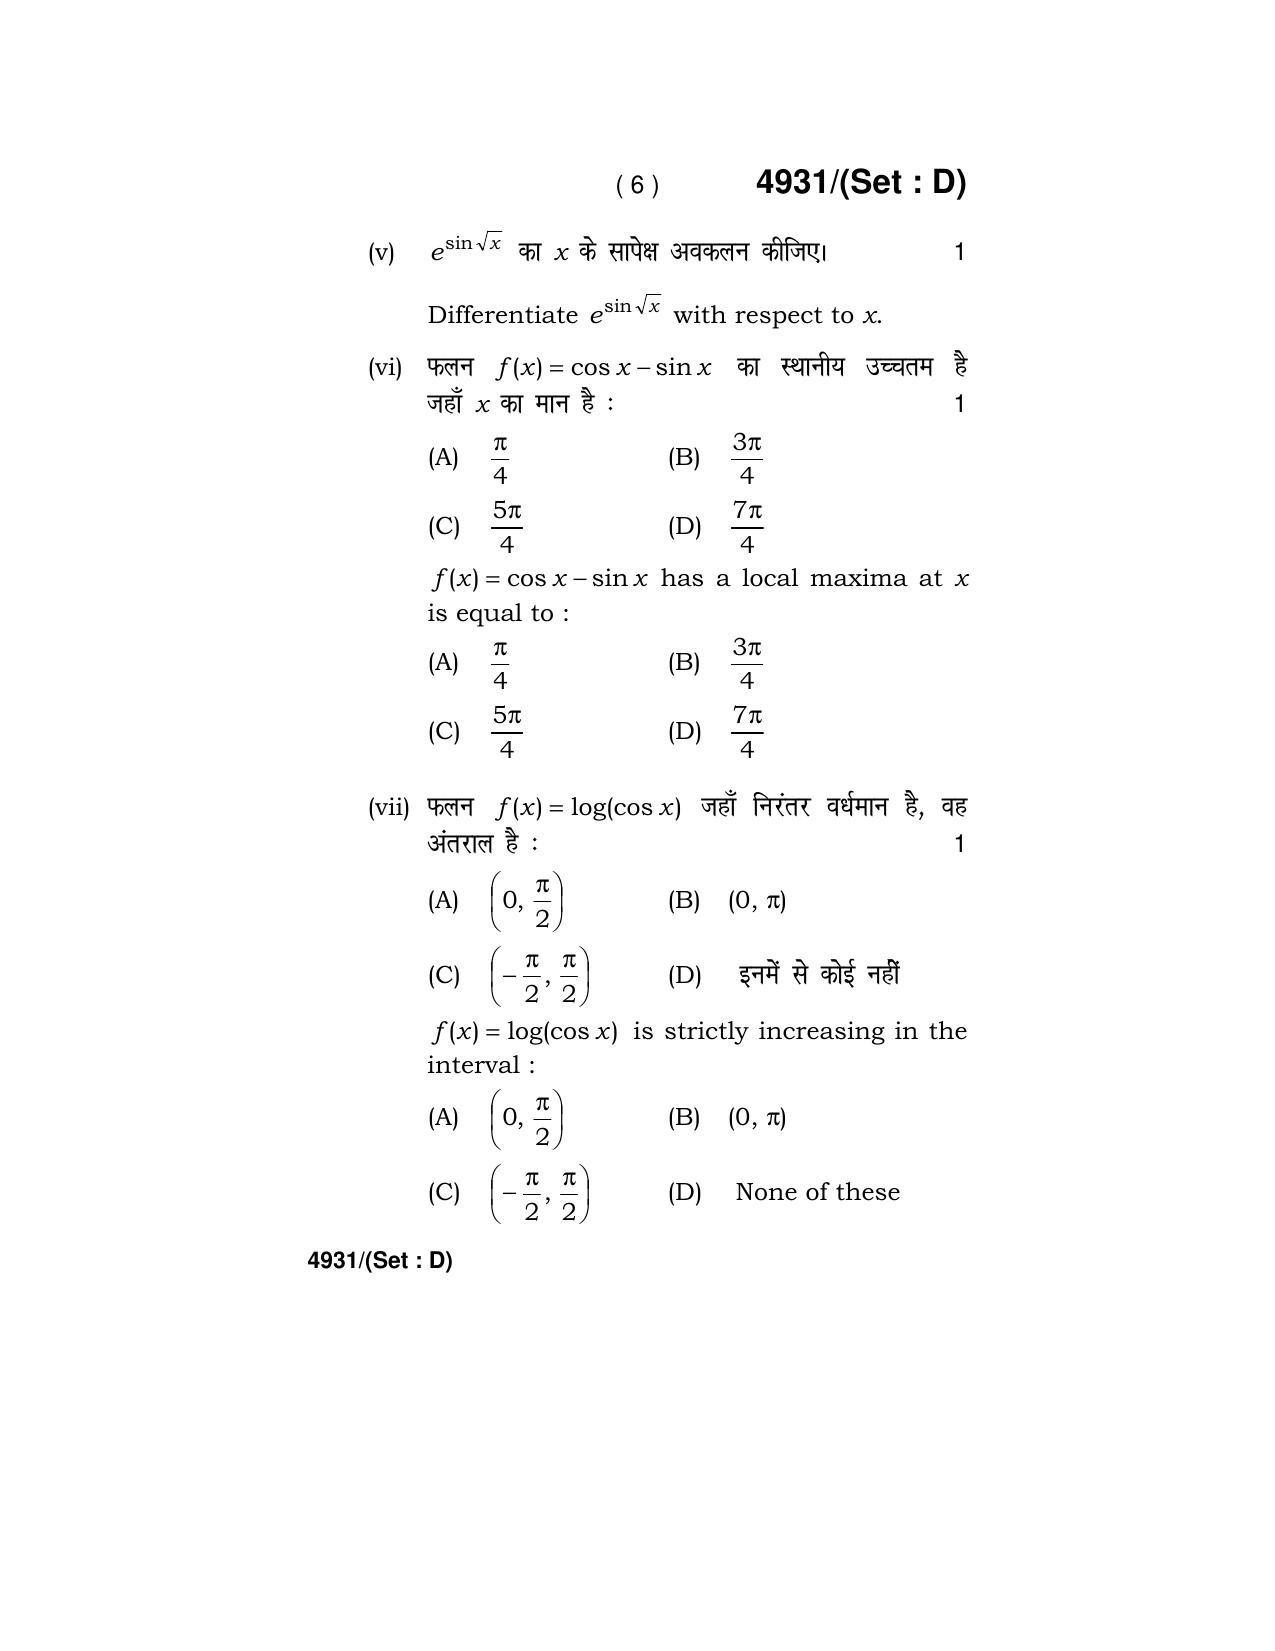 Haryana Board HBSE Class 12 Mathematics 2020 Question Paper - Page 54